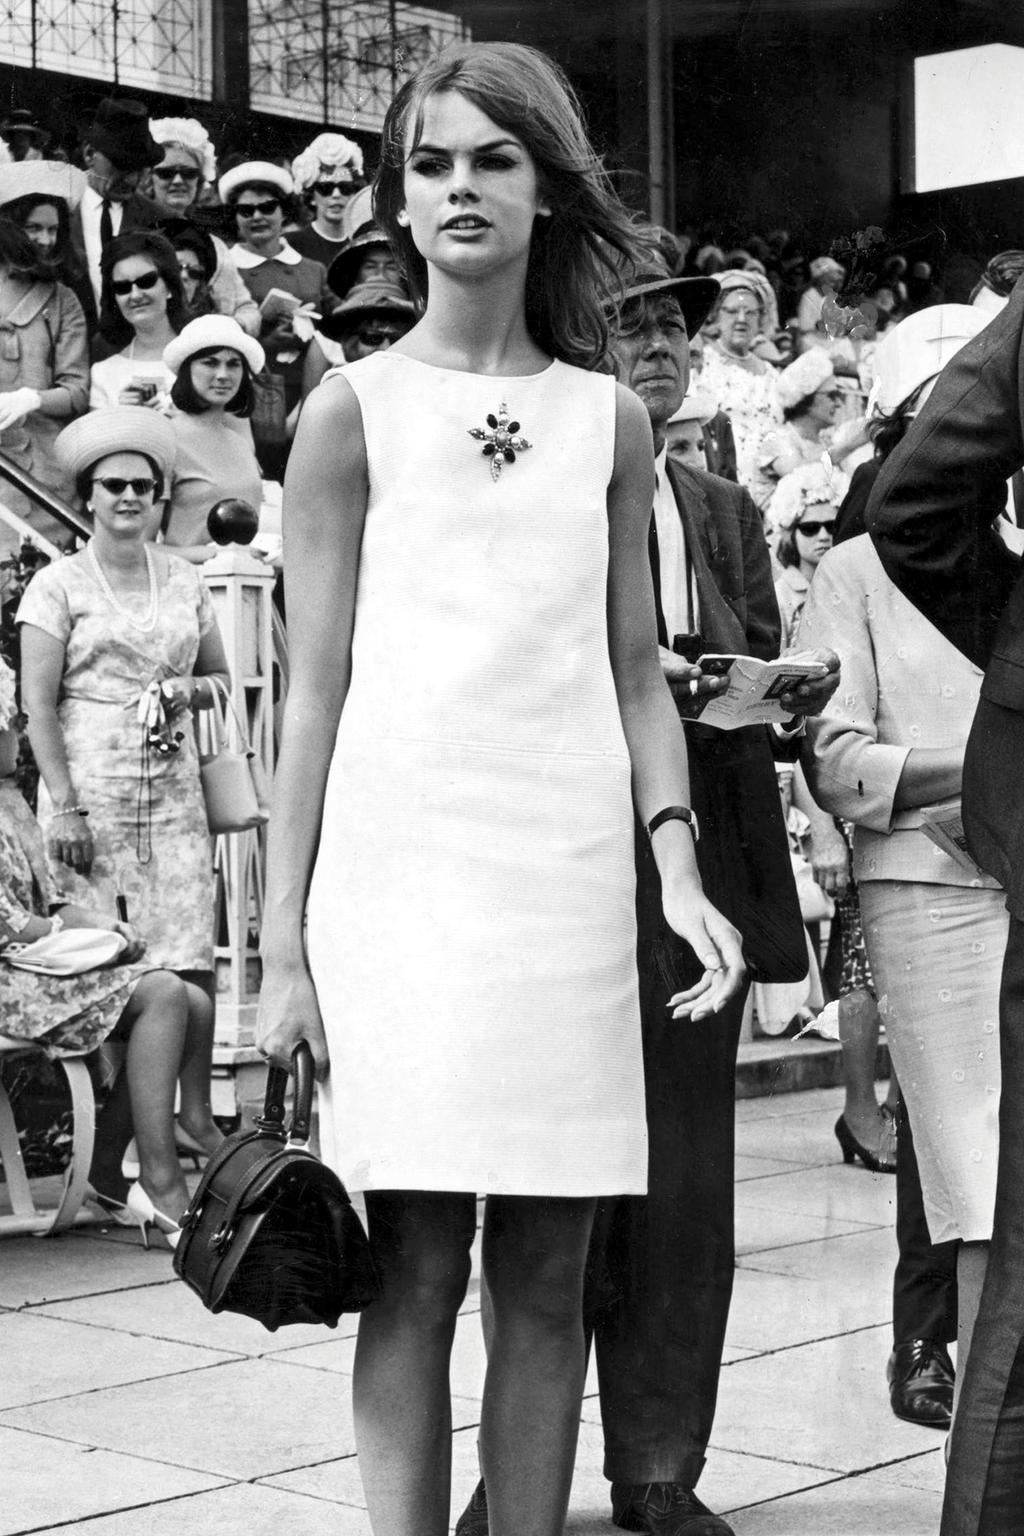 Black and white photo of Jean Shrimpton in a white mini dress at a race.